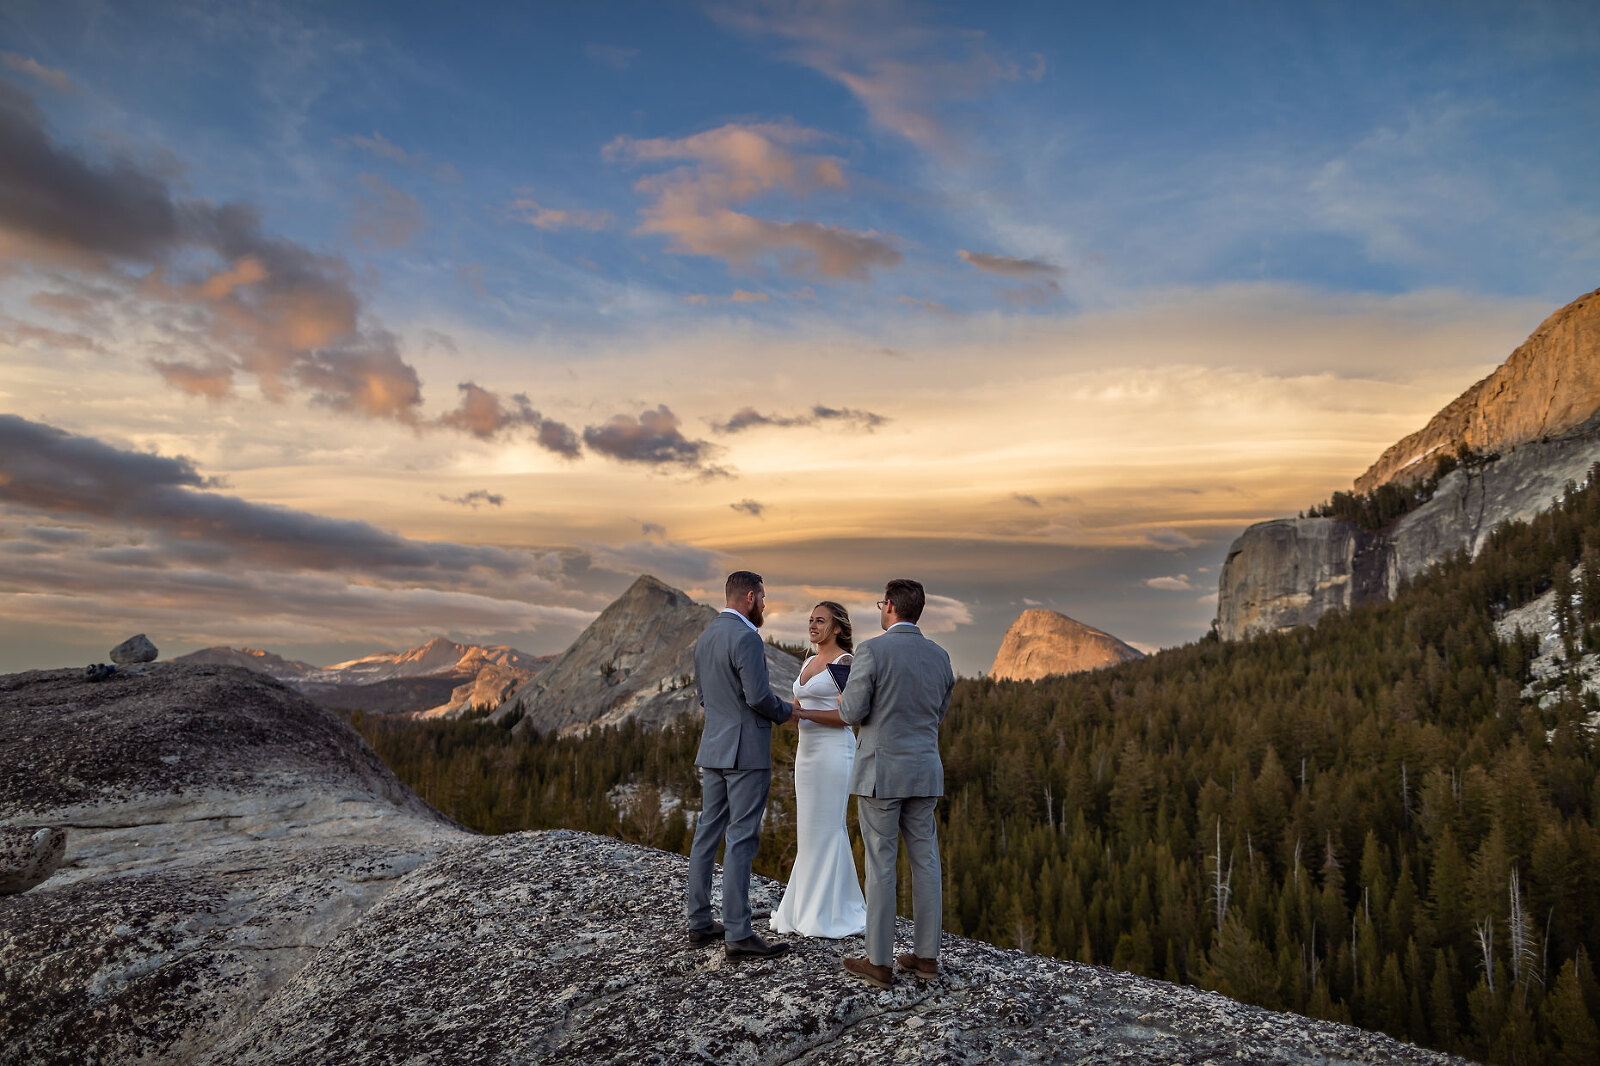 Elopement wedding ceremony in nature at sunset.